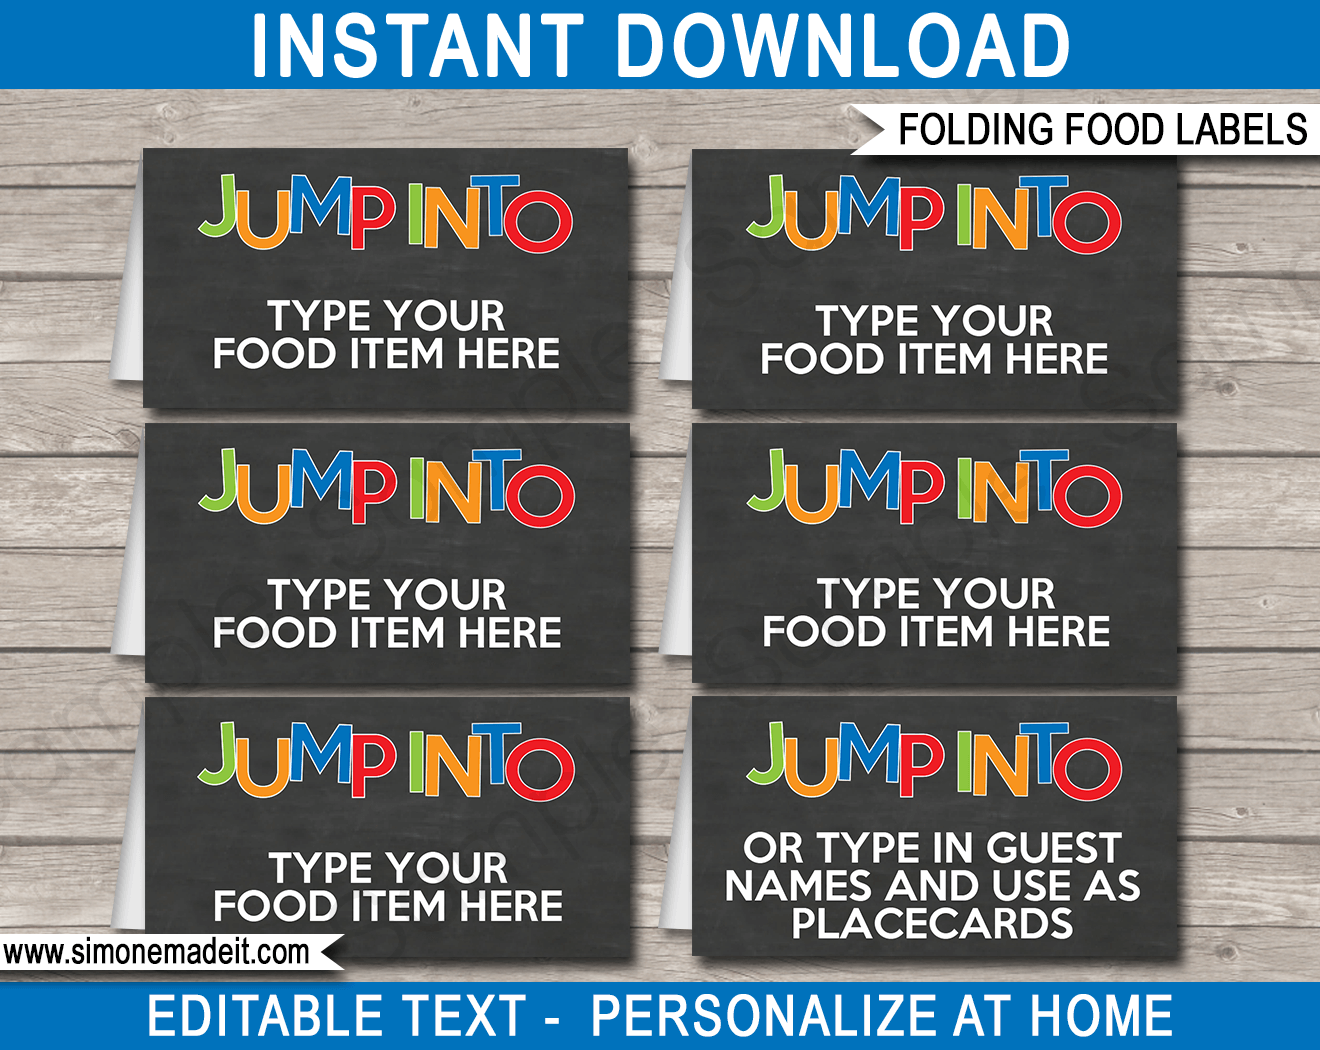 Trampoline Party Food Labels template | Place Cards | Printable Birthday Party Decorations | DIY Editable template | INSTANT DOWNLOAD via simonemadeit.com